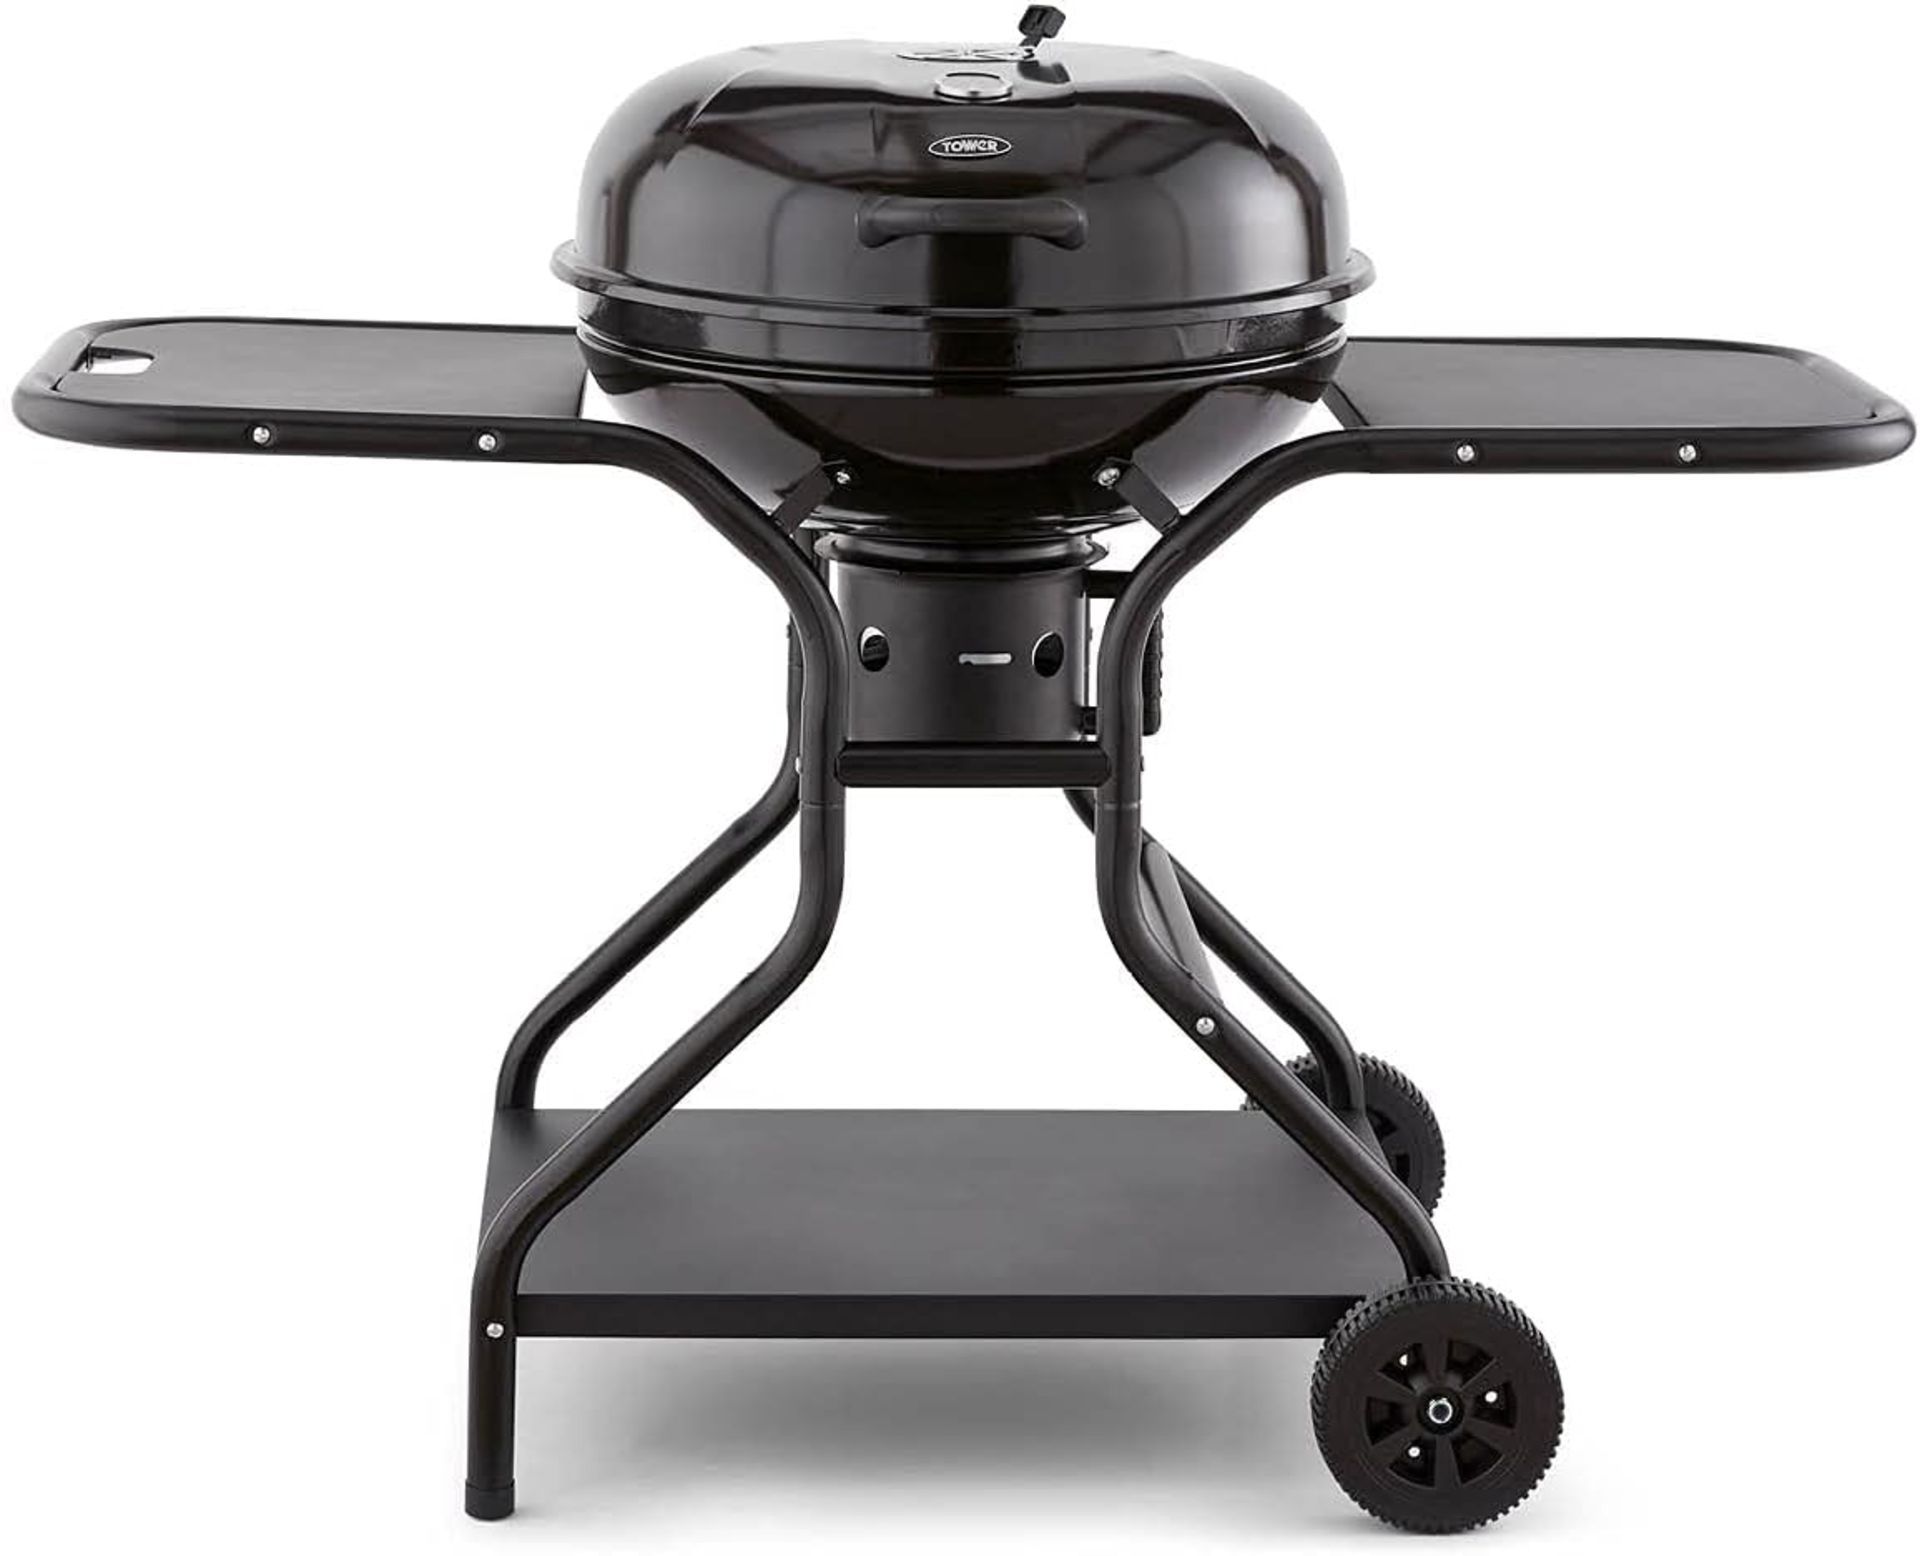 BRAND NEW TOWER Charcoal BBQ Grill With Tables. RRP £179.99 EACH. Grill some delicious ingredients